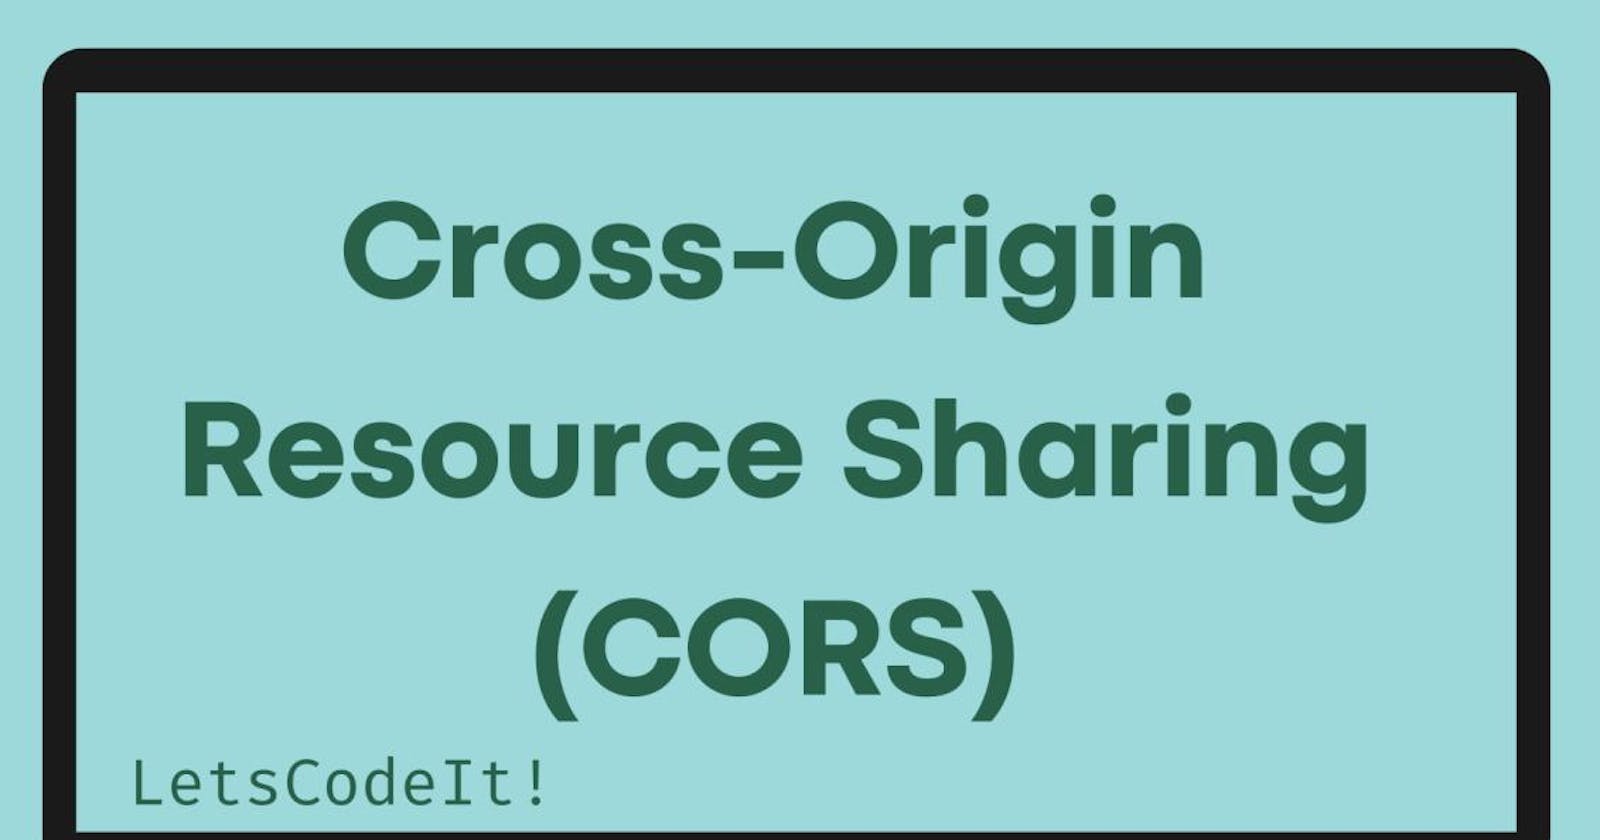 Cross-Origin Resource Sharing (CORS) and how to implement it in your application